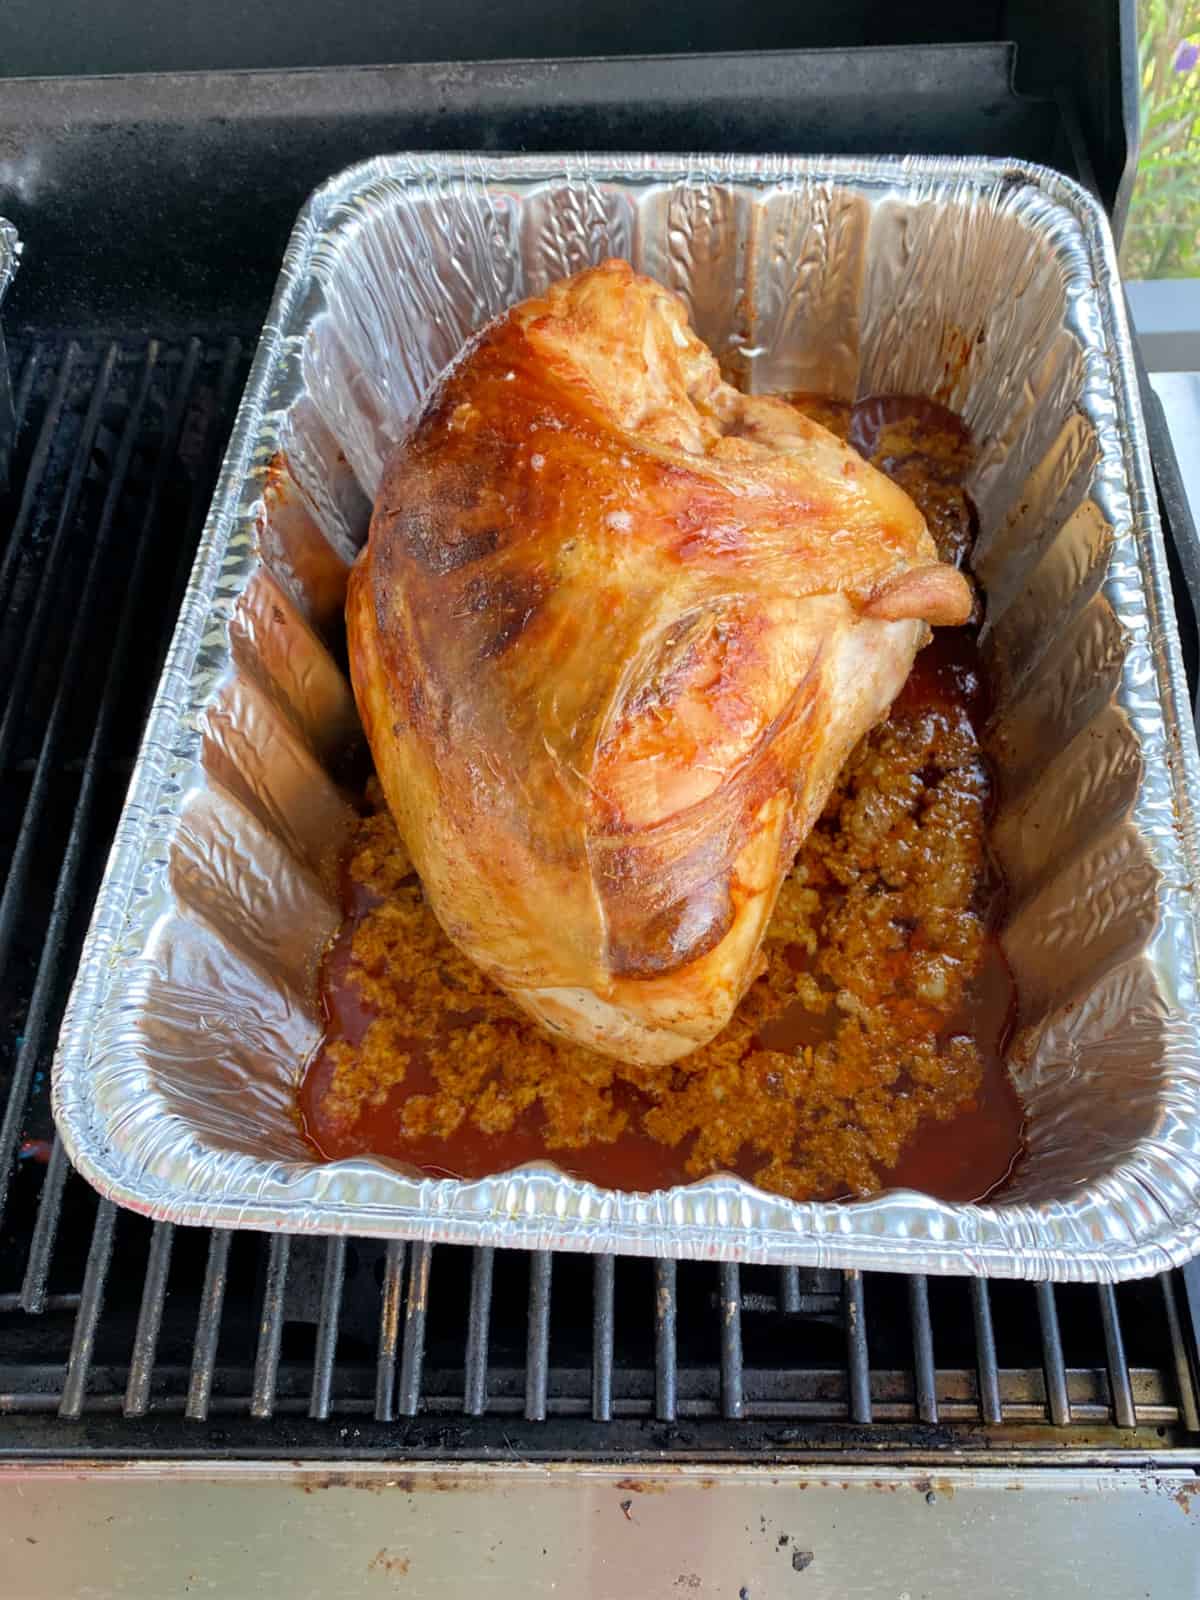 Browned turkey breast in a metal pan with juices over a grill grate.